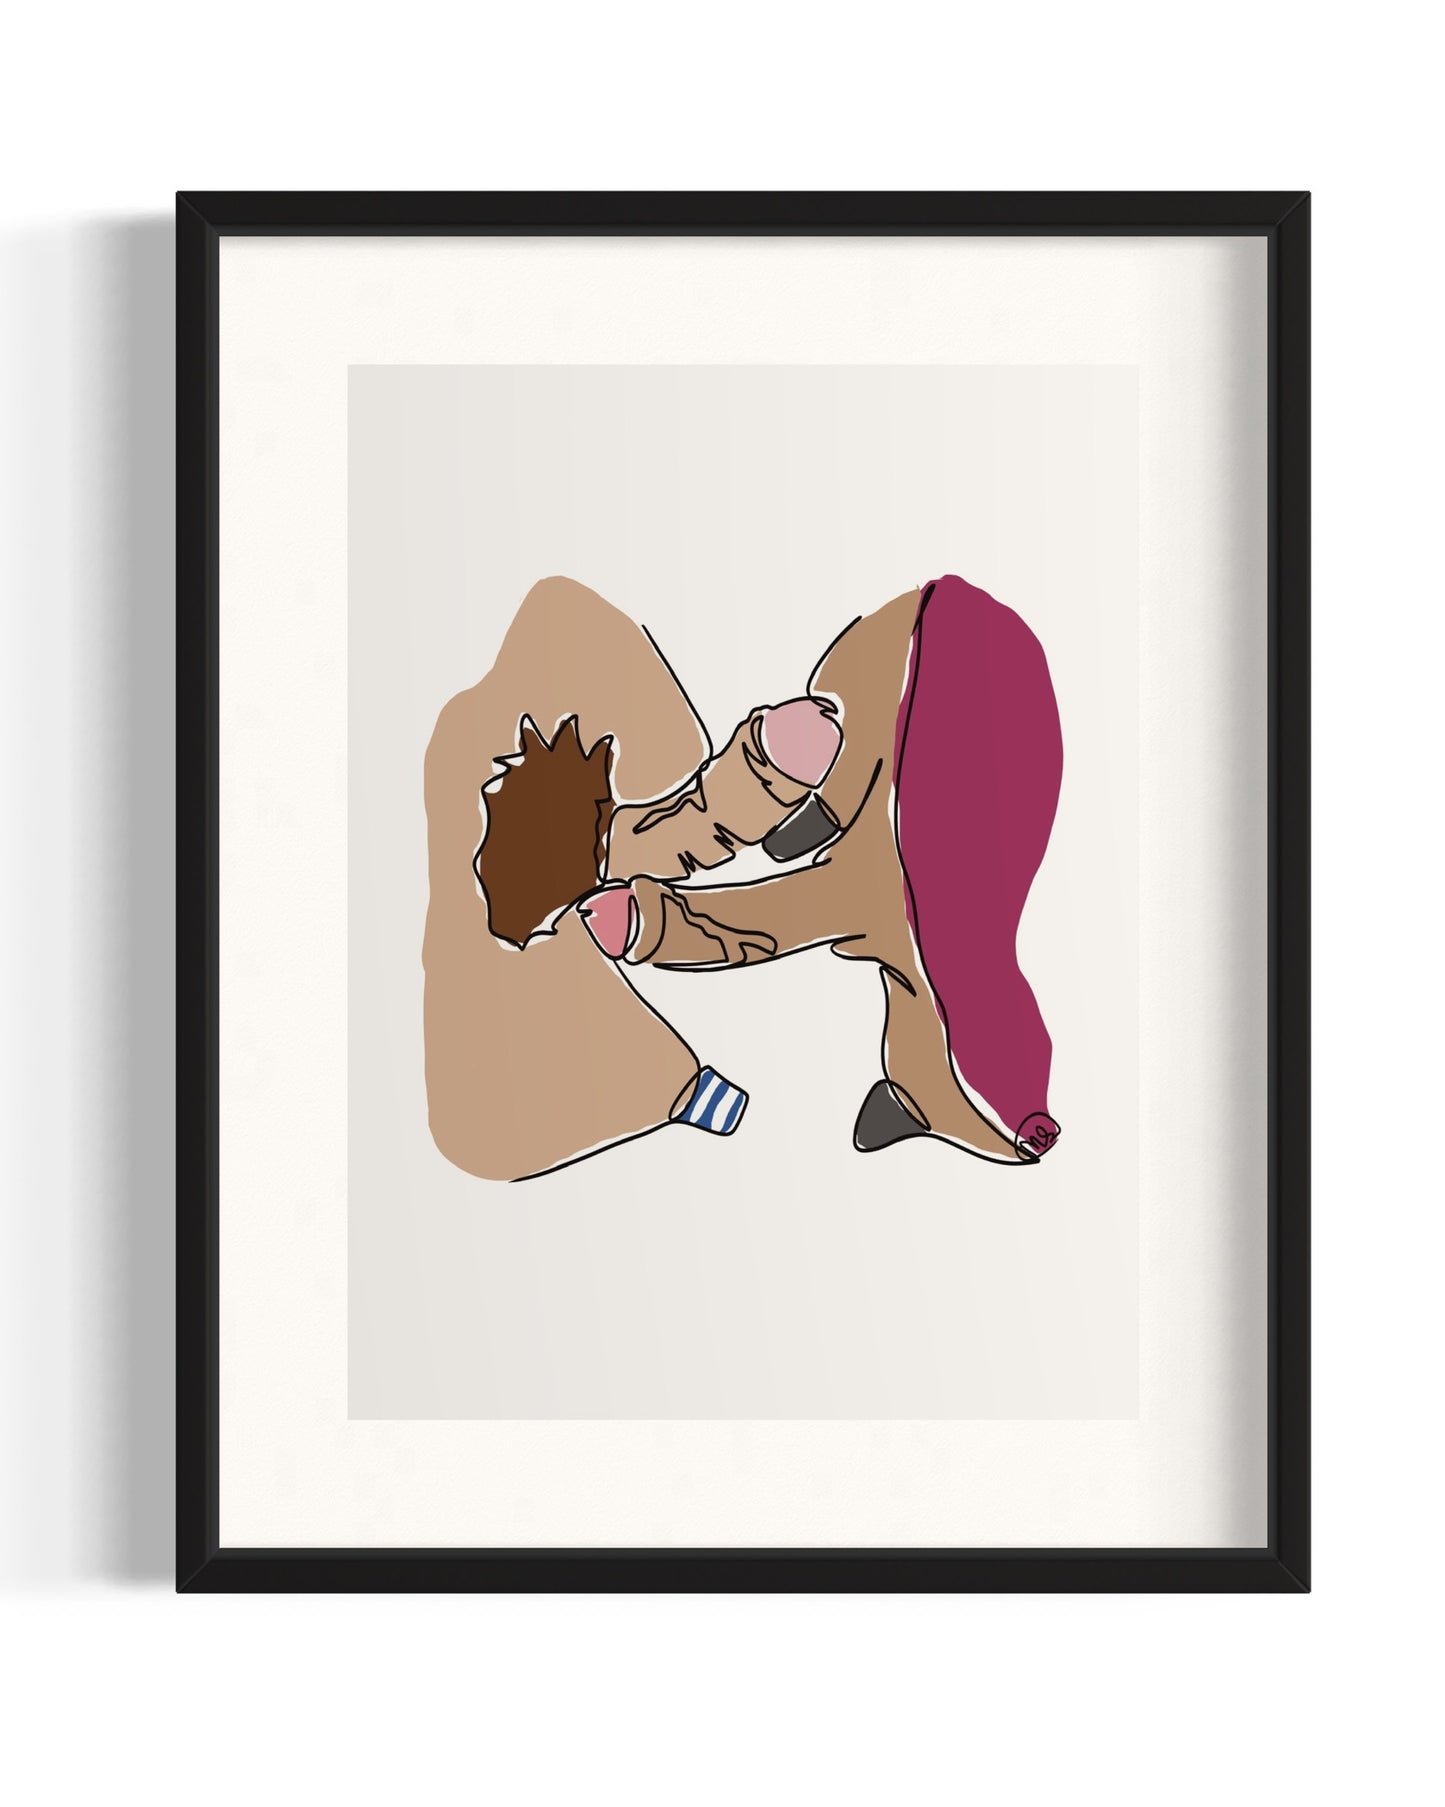 Show me yours - Art Print